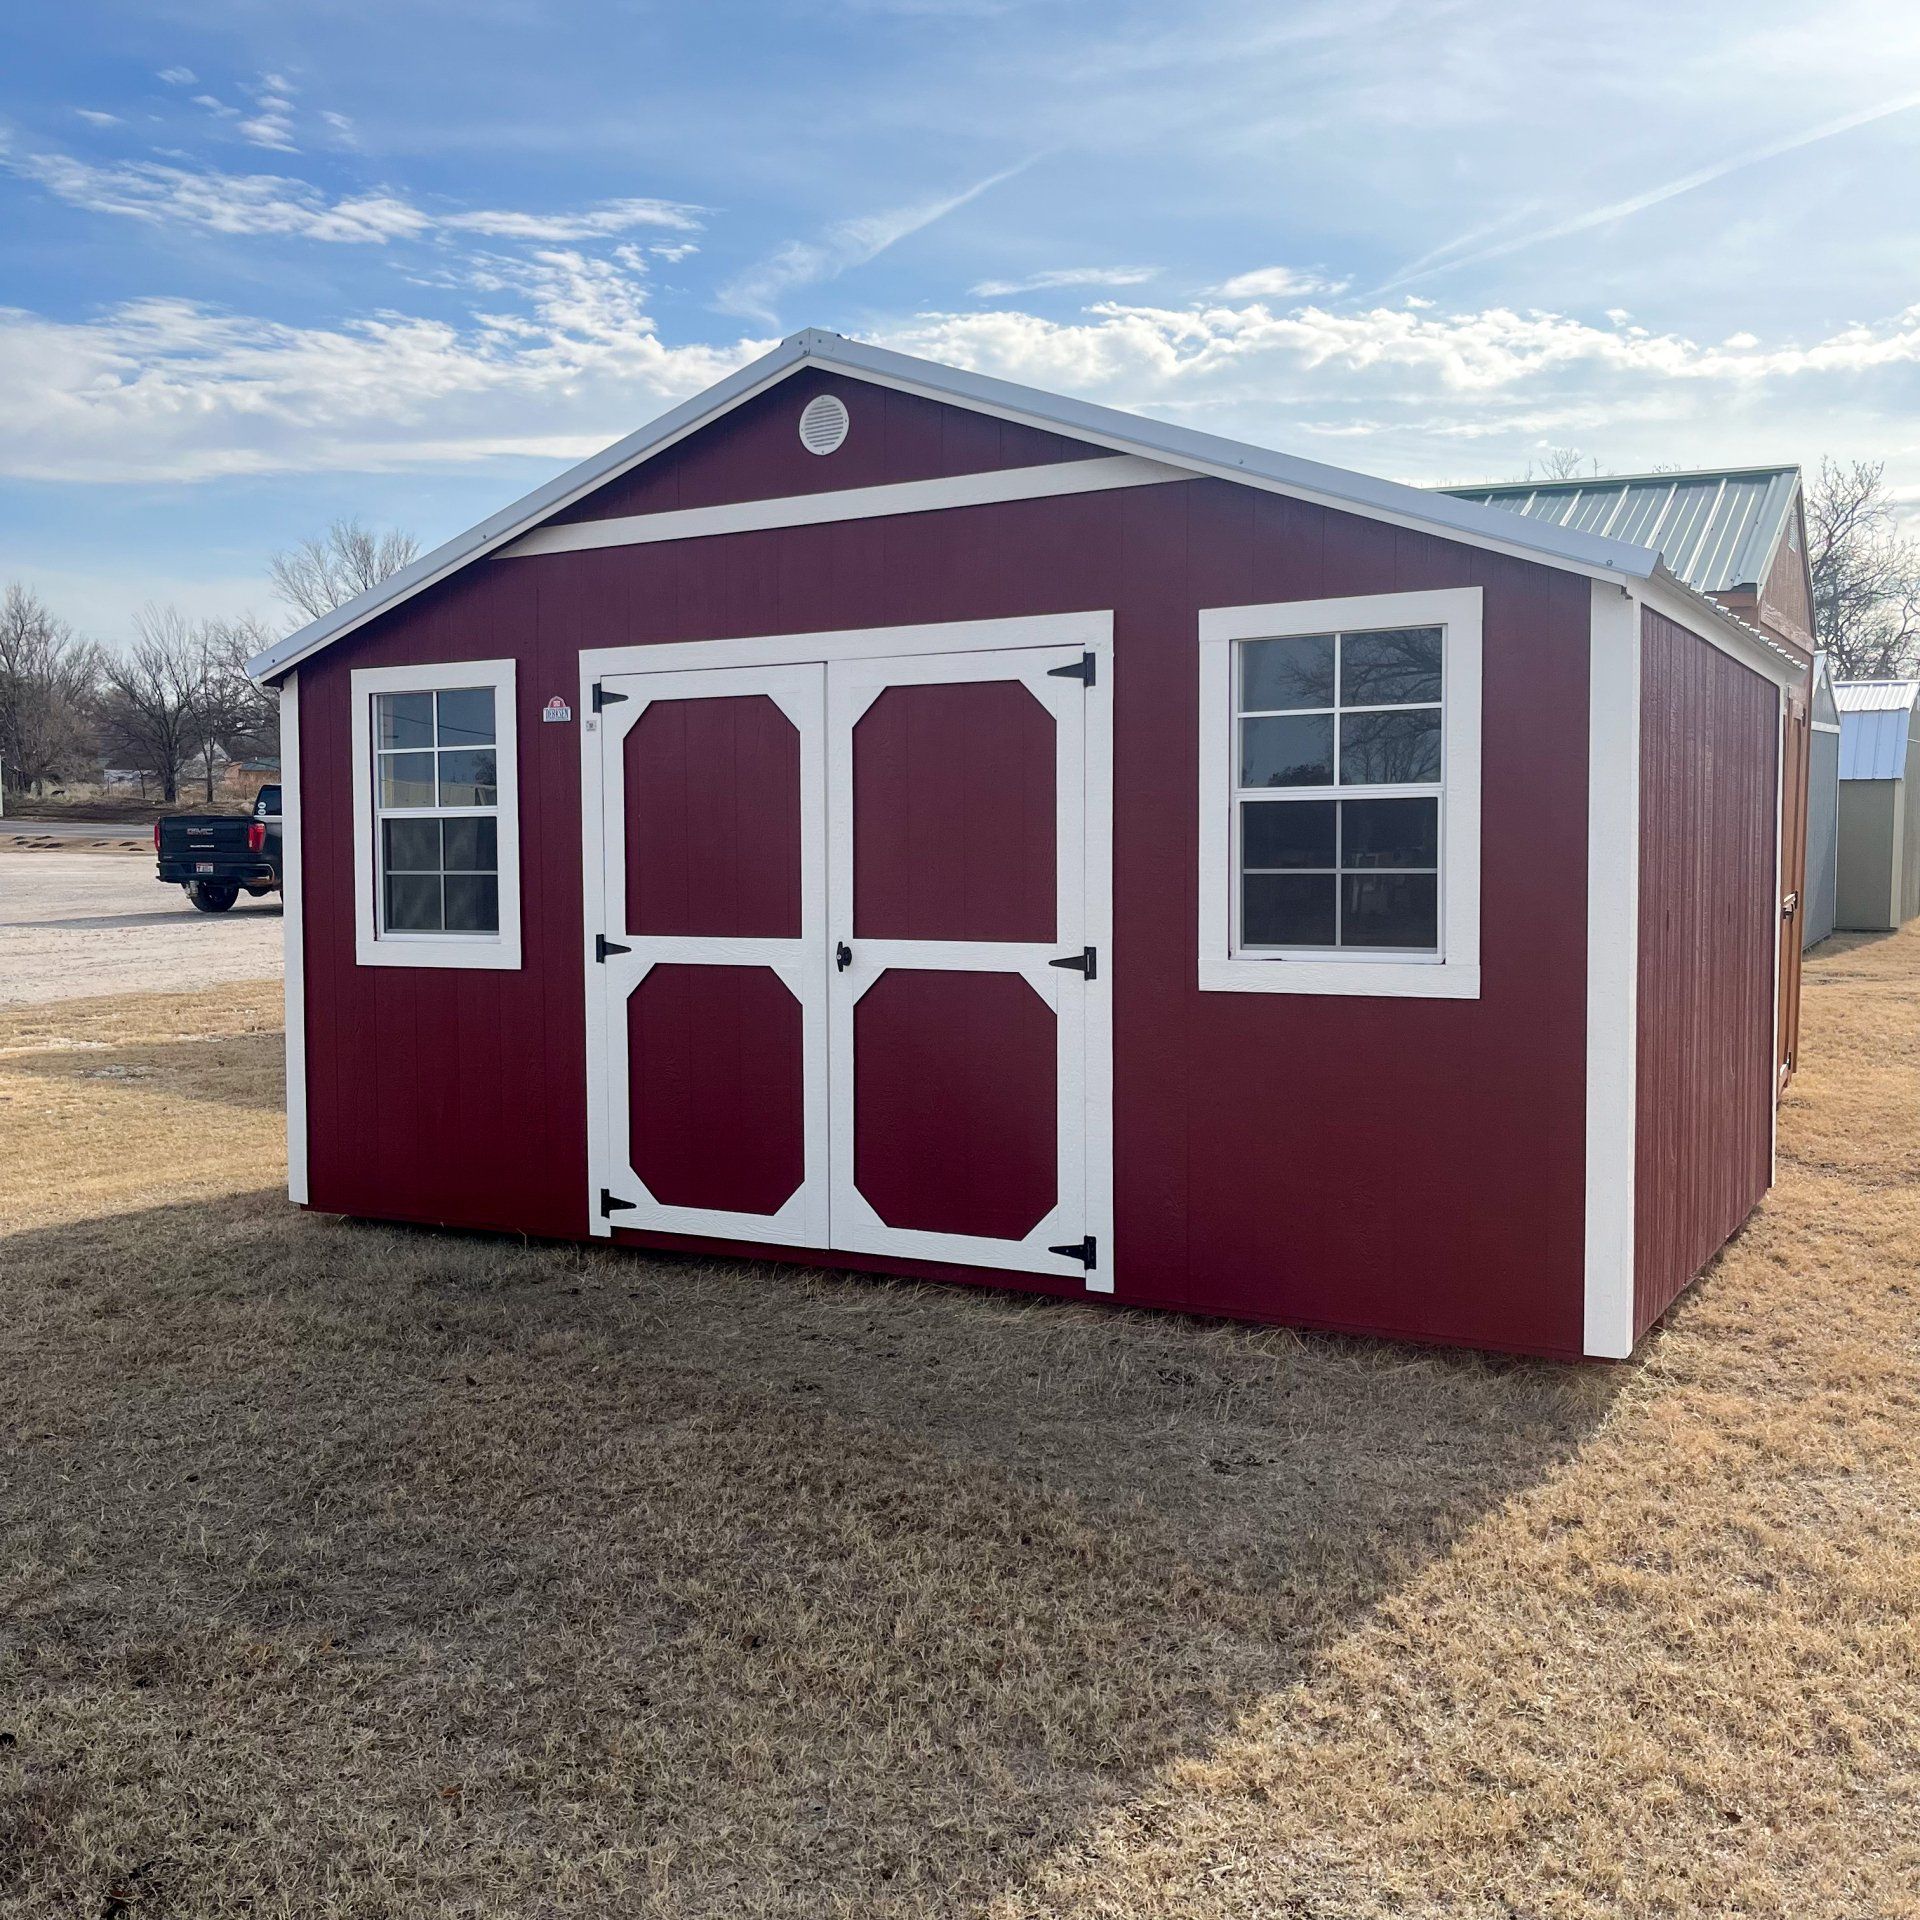 A red side utility  shed with white trim and windows is sitting in the middle of a field.